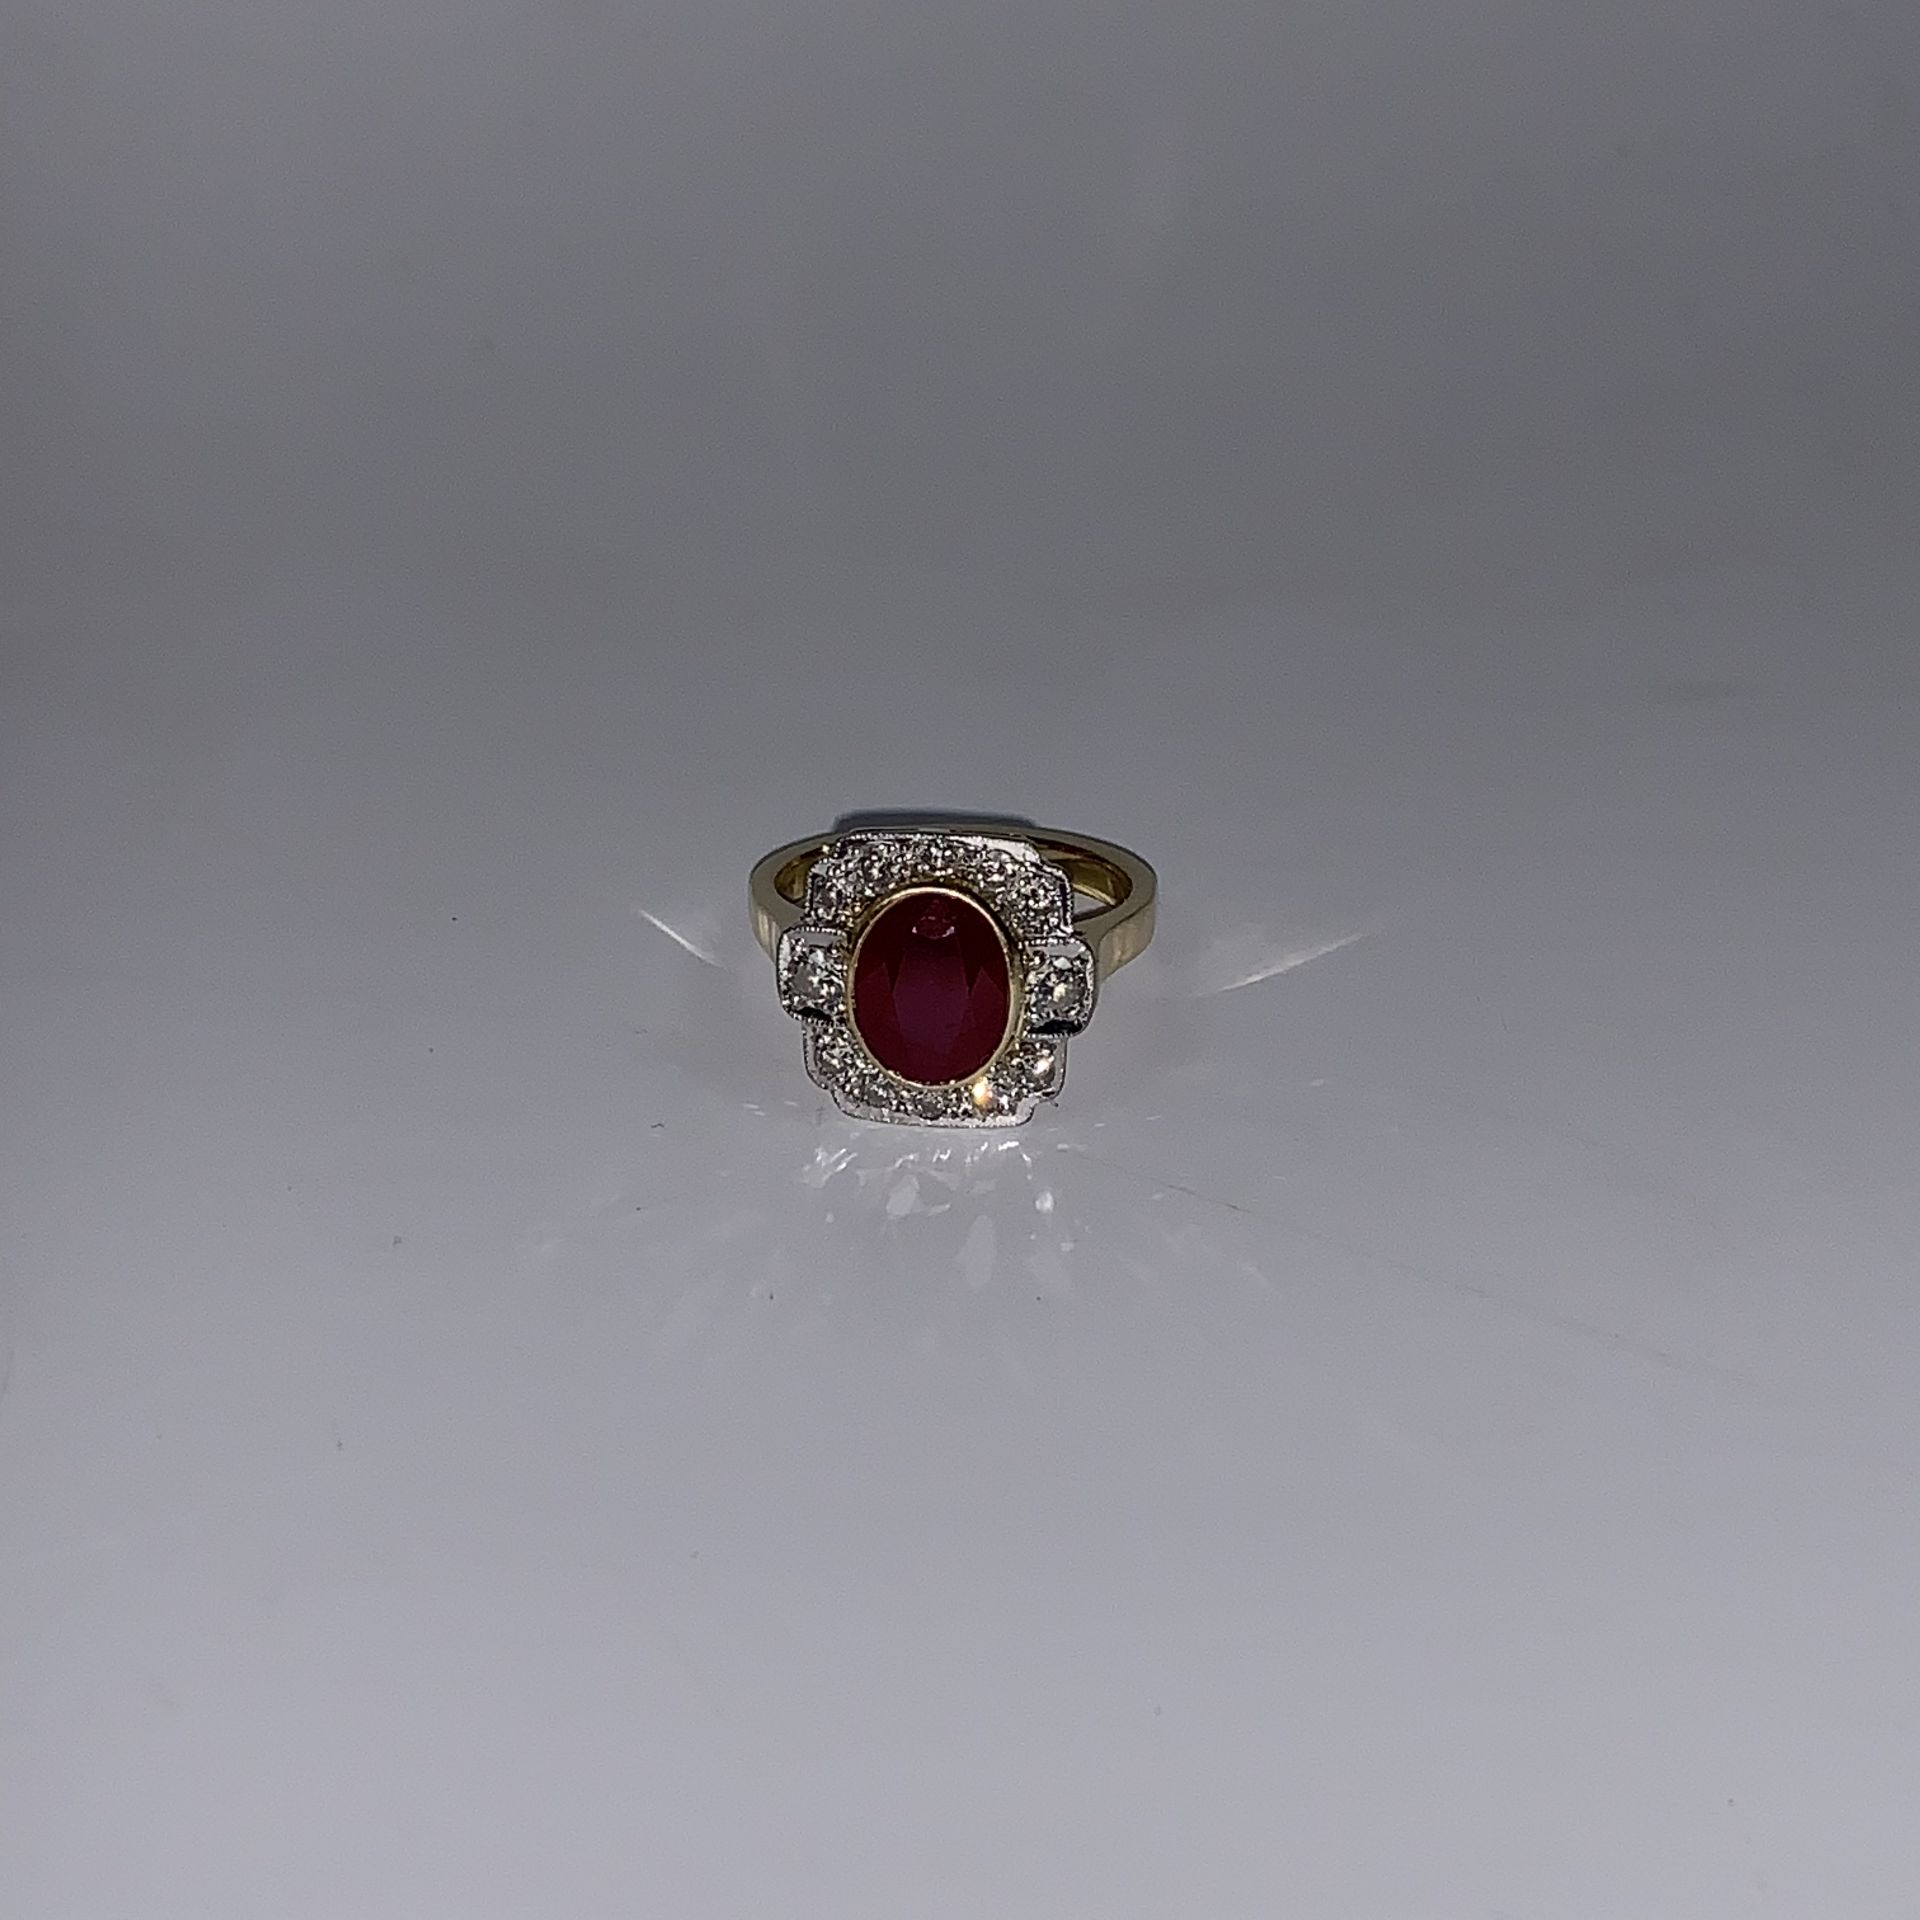 An Art Deco style ruby and diamond ring complete with valuation certificate which details the ring - Image 3 of 8